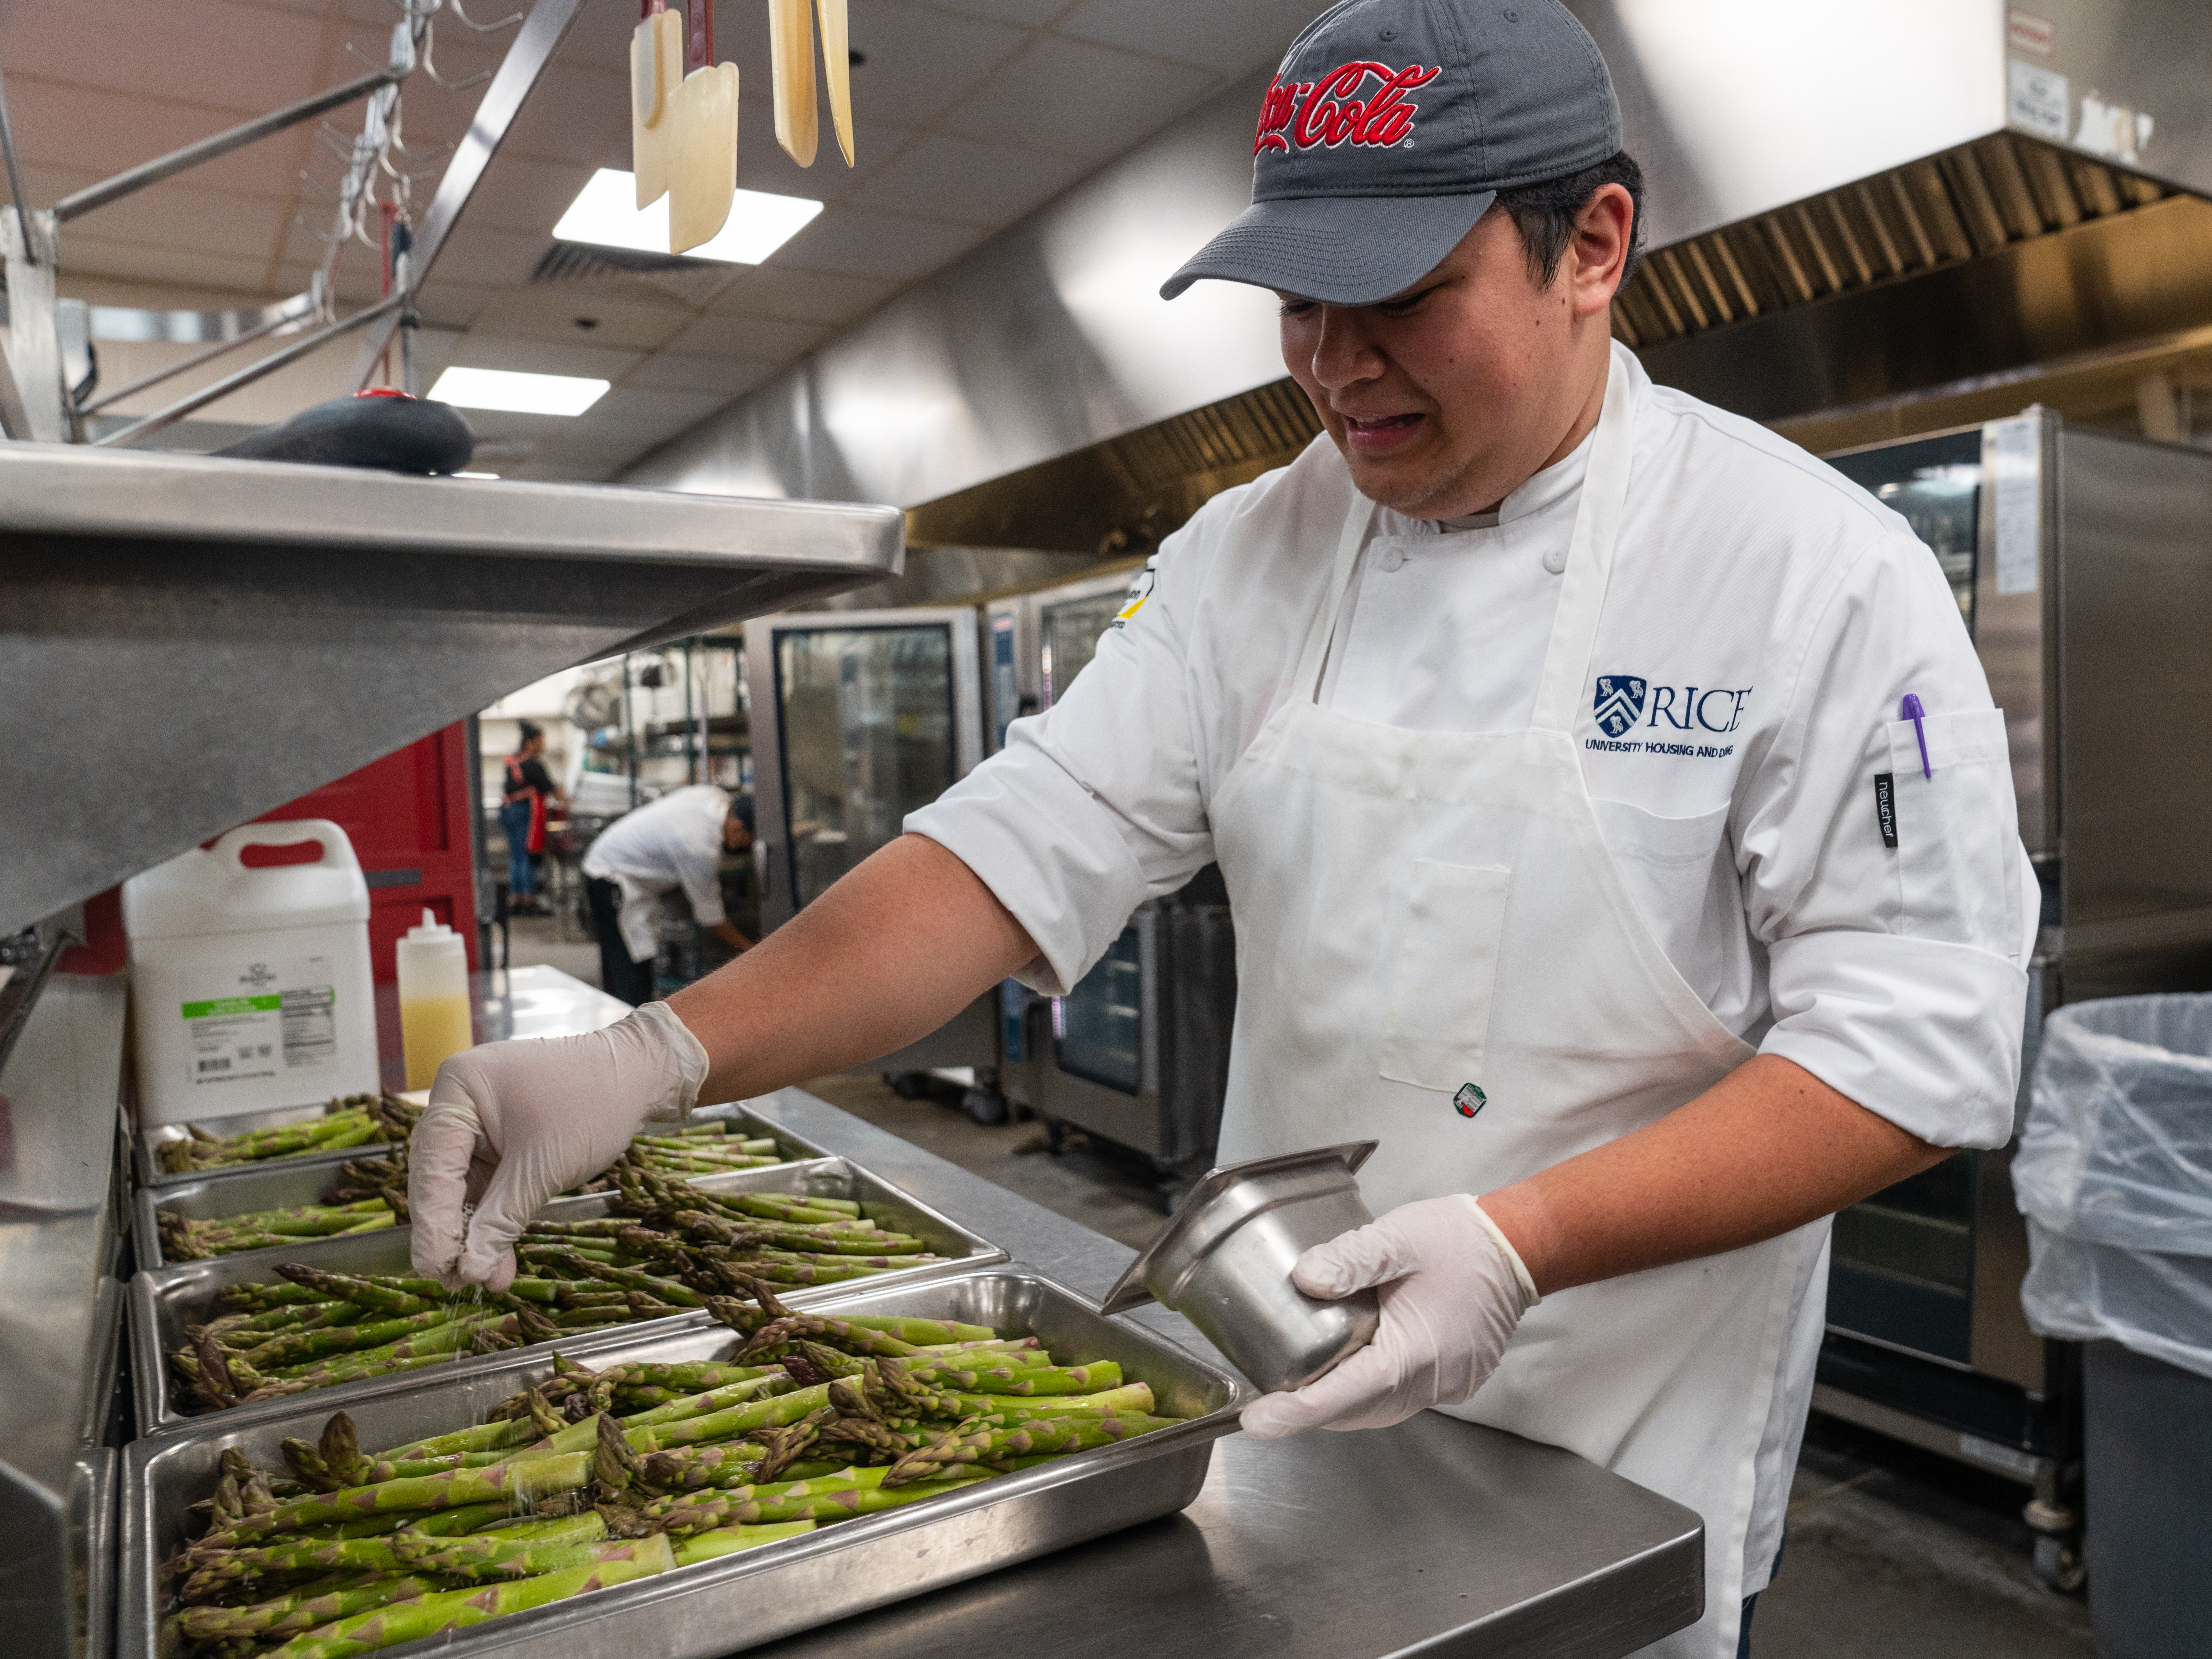 Male wearing a cap, apron, and chef coat salting asparagus in a metal tray.